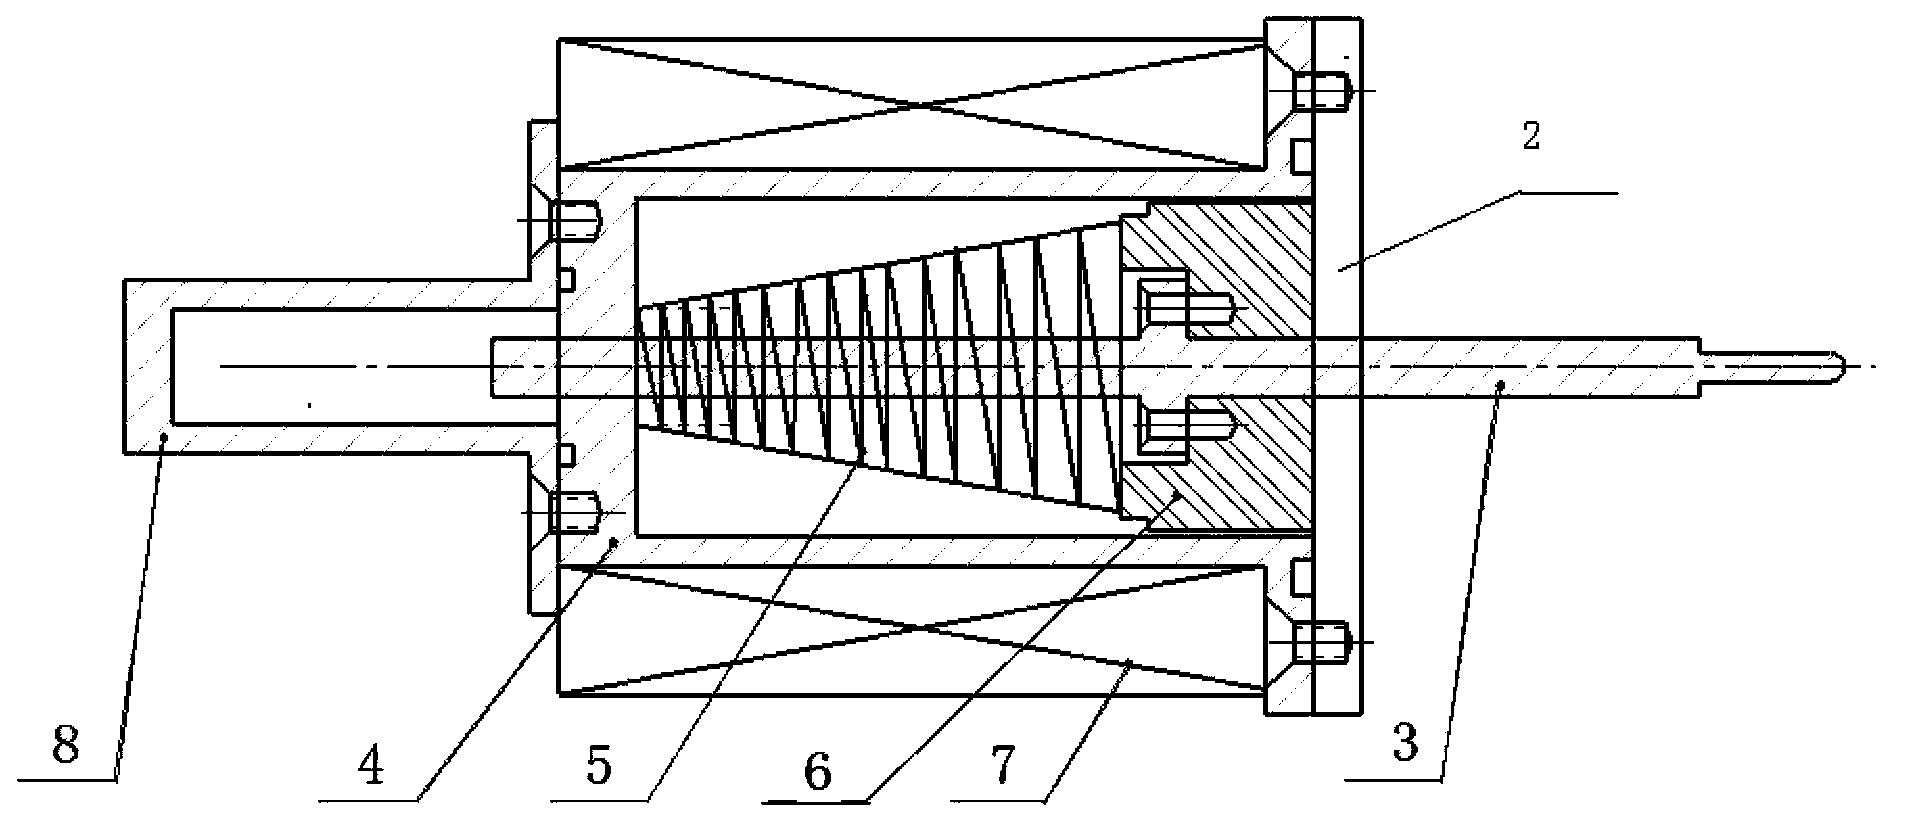 Cascade-stage-type electron beam diode